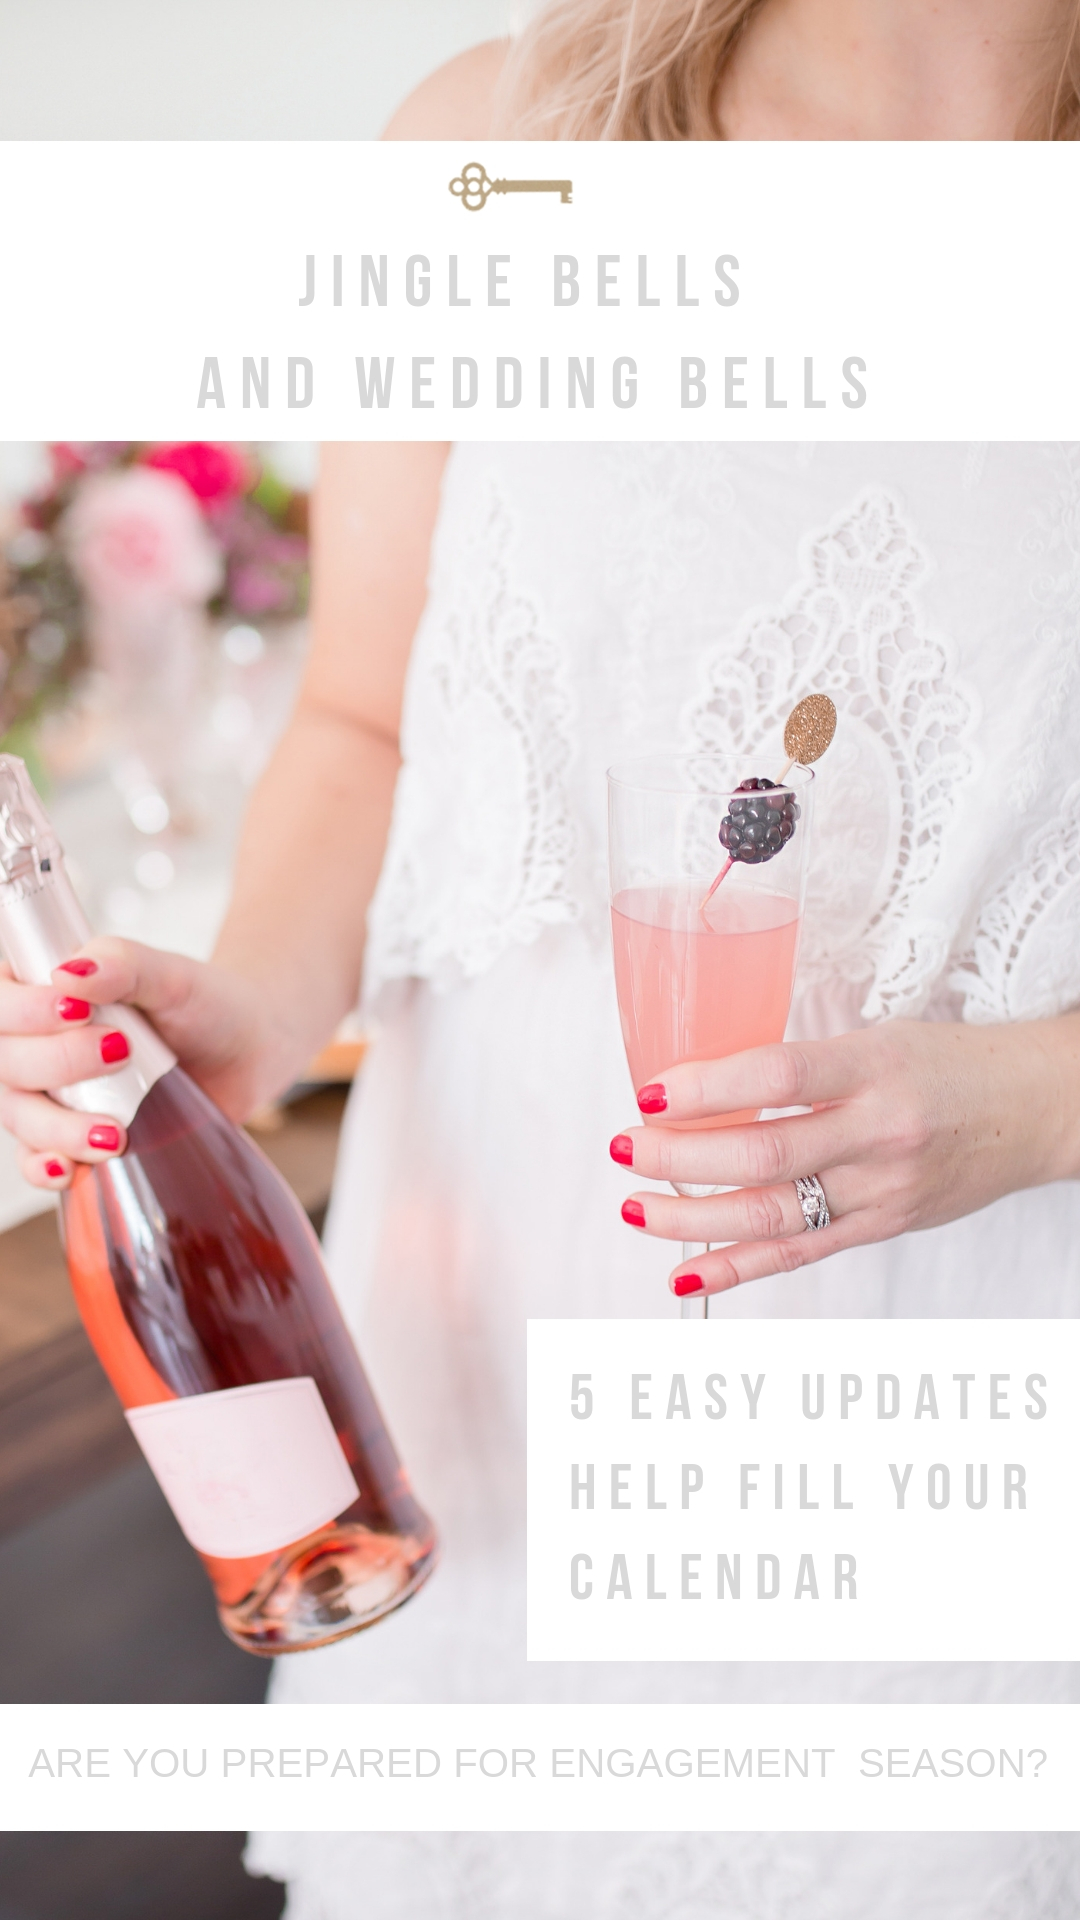 5 Easy Updates To Prepare For Engagement Season | Quianna Marie